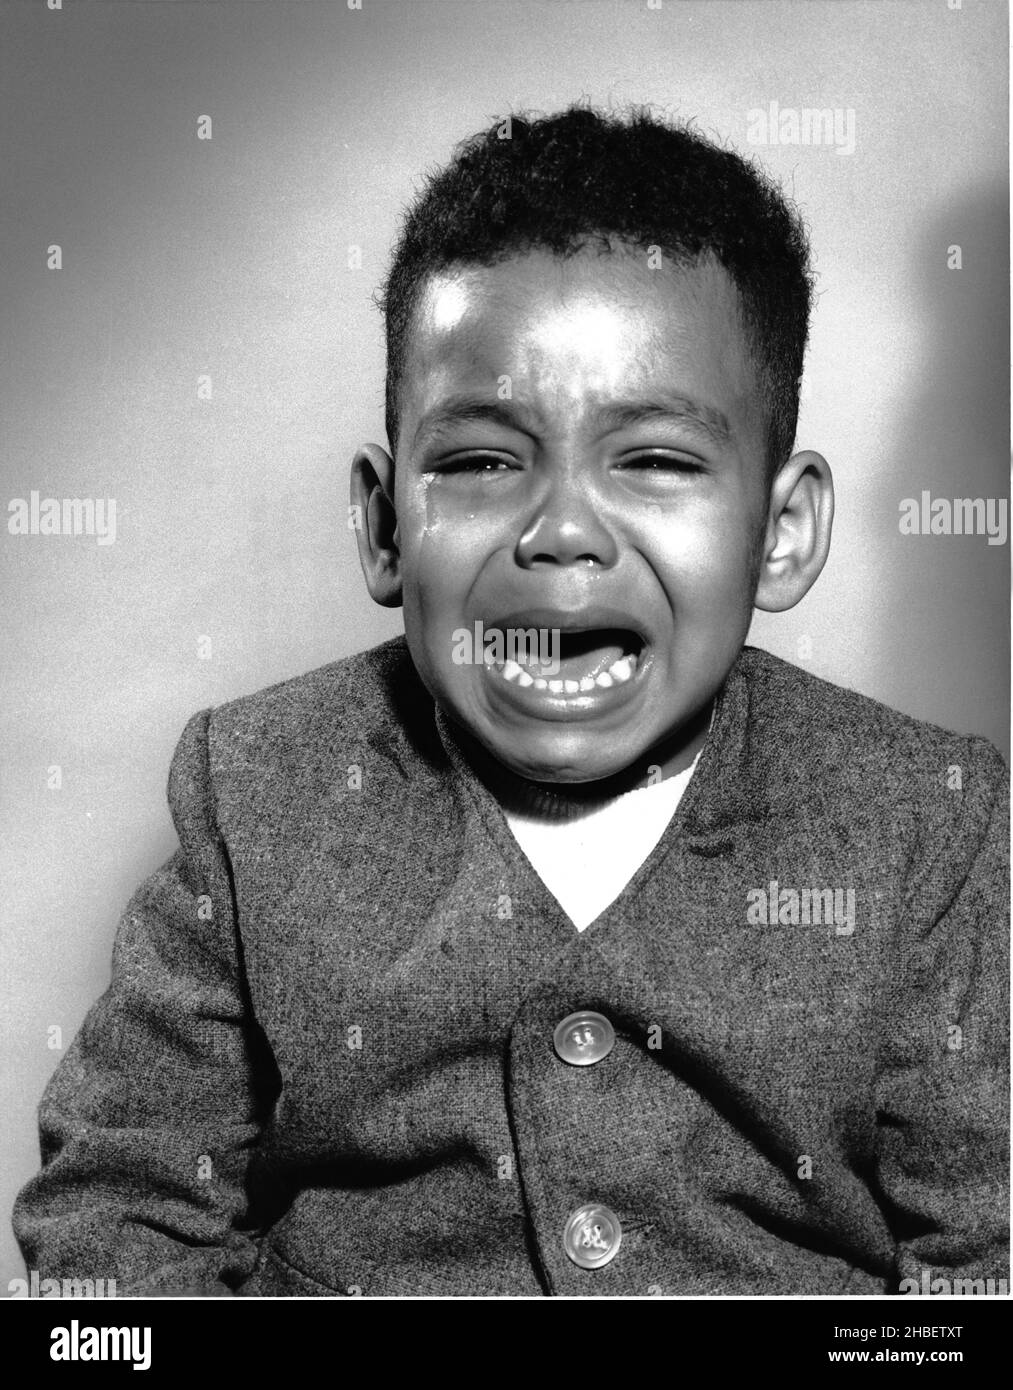 African American boy nicely dressed crying Stock Photo